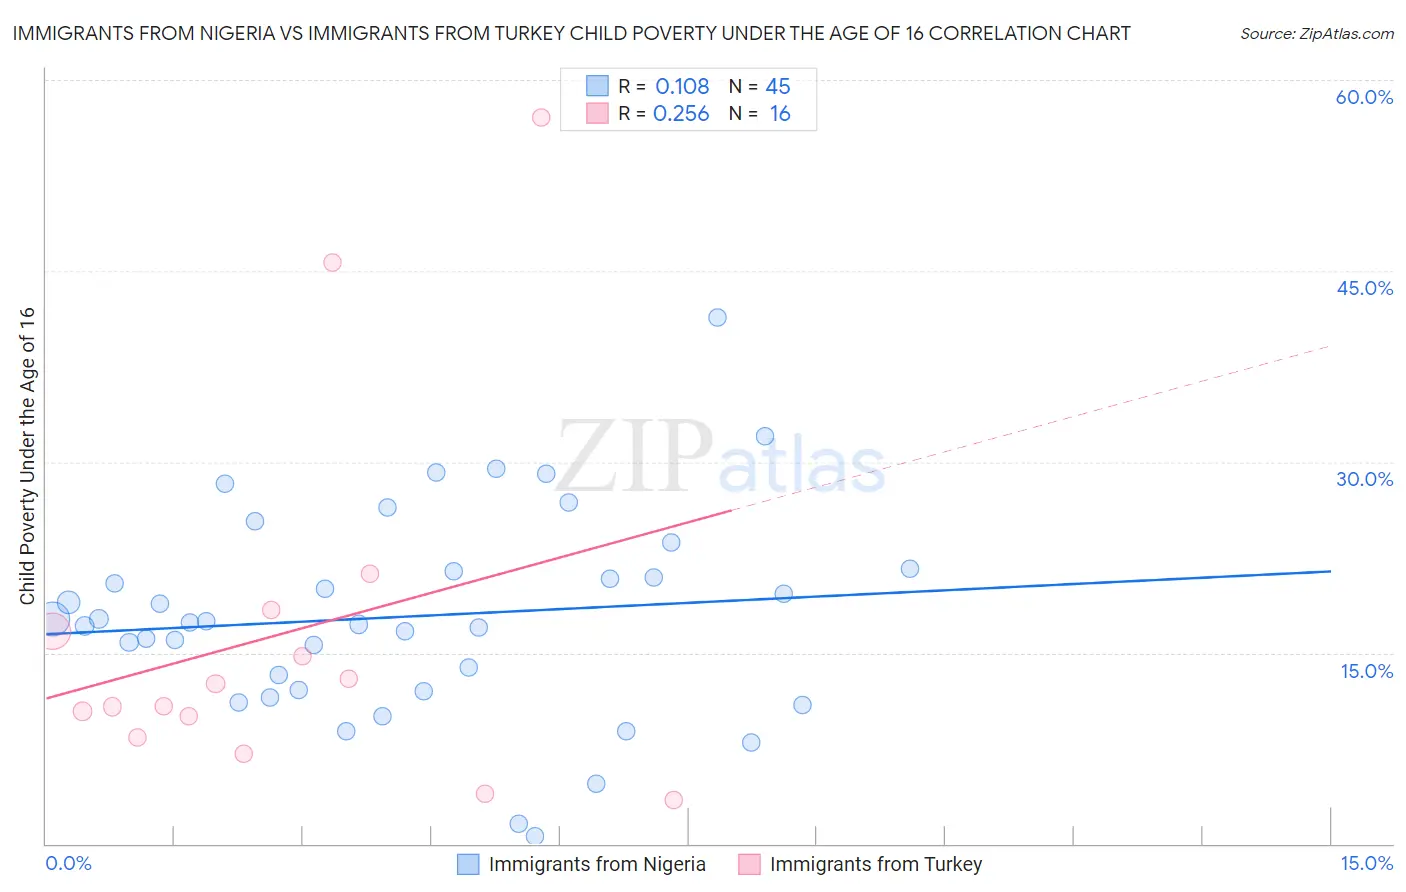 Immigrants from Nigeria vs Immigrants from Turkey Child Poverty Under the Age of 16